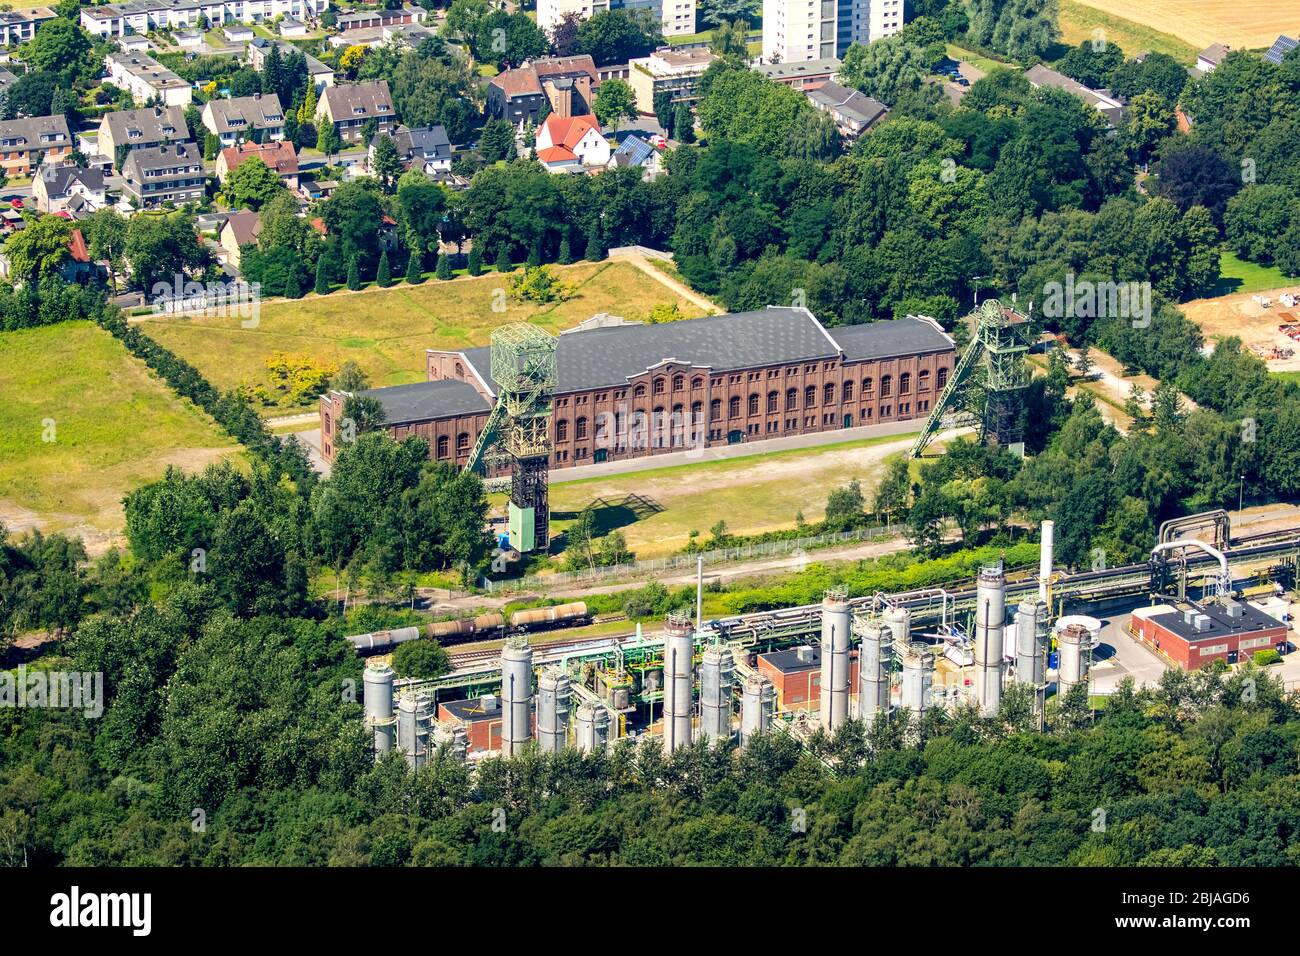 Maschinenhalle in Gladbeck, the industrial monument is now the venue for events such as concerts, theater, exhibitions and fairs, 19.07.2016, aerial view, Germany, North Rhine-Westphalia, Ruhr Area, Gladbeck Stock Photo